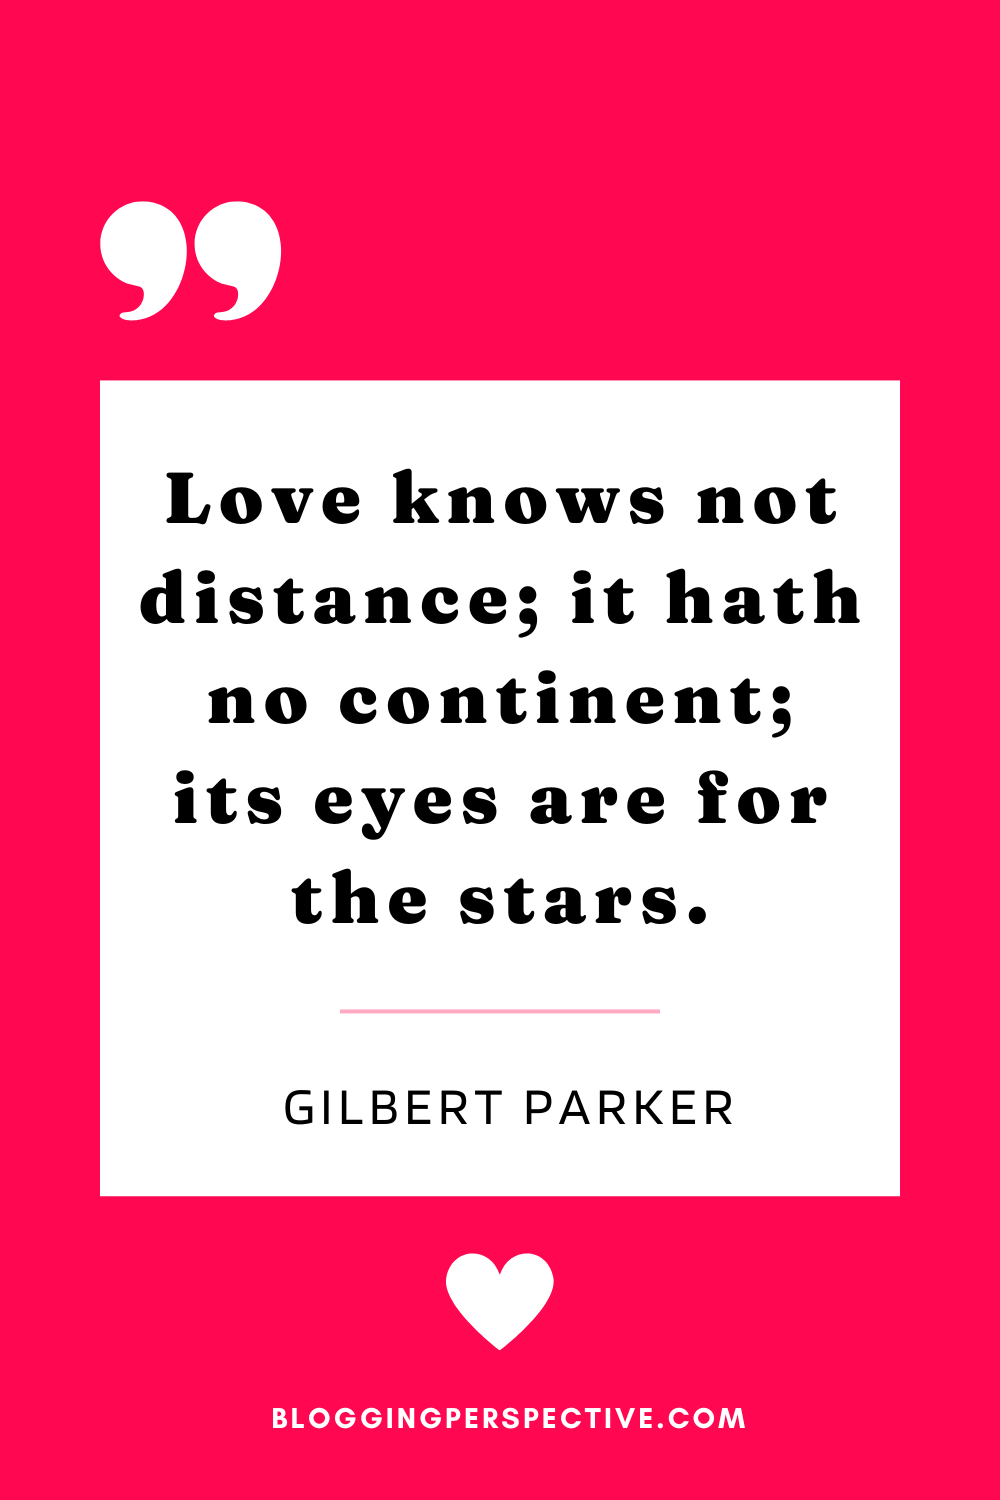 Love knows not distance; it hath no continent; its eyes are for stars